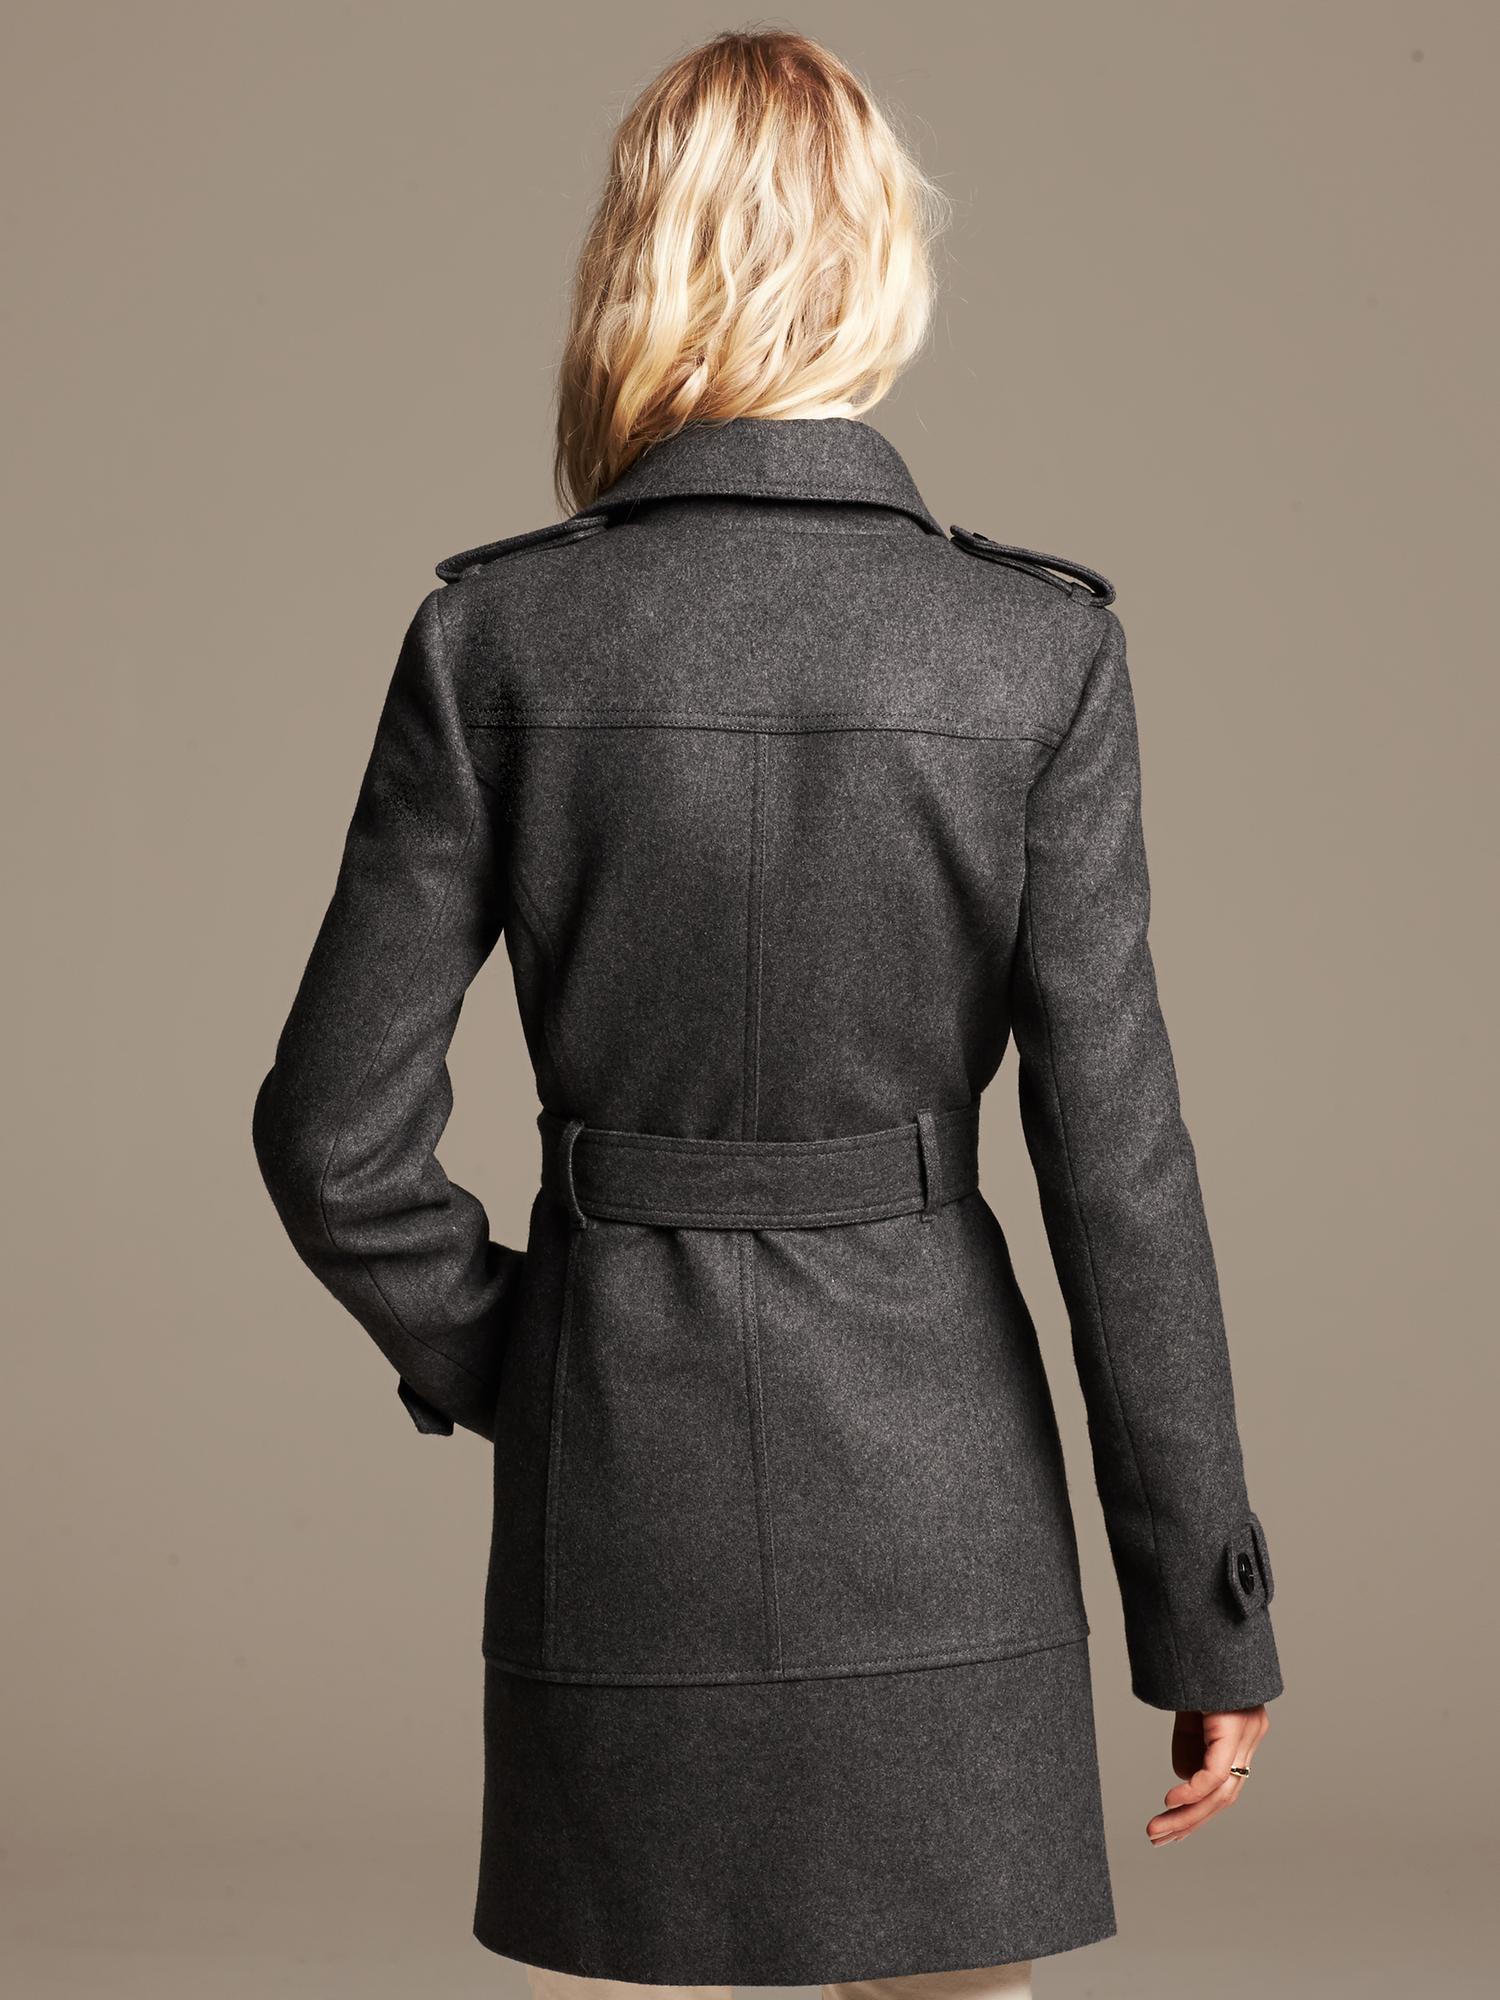 Charcoal Wool Trench